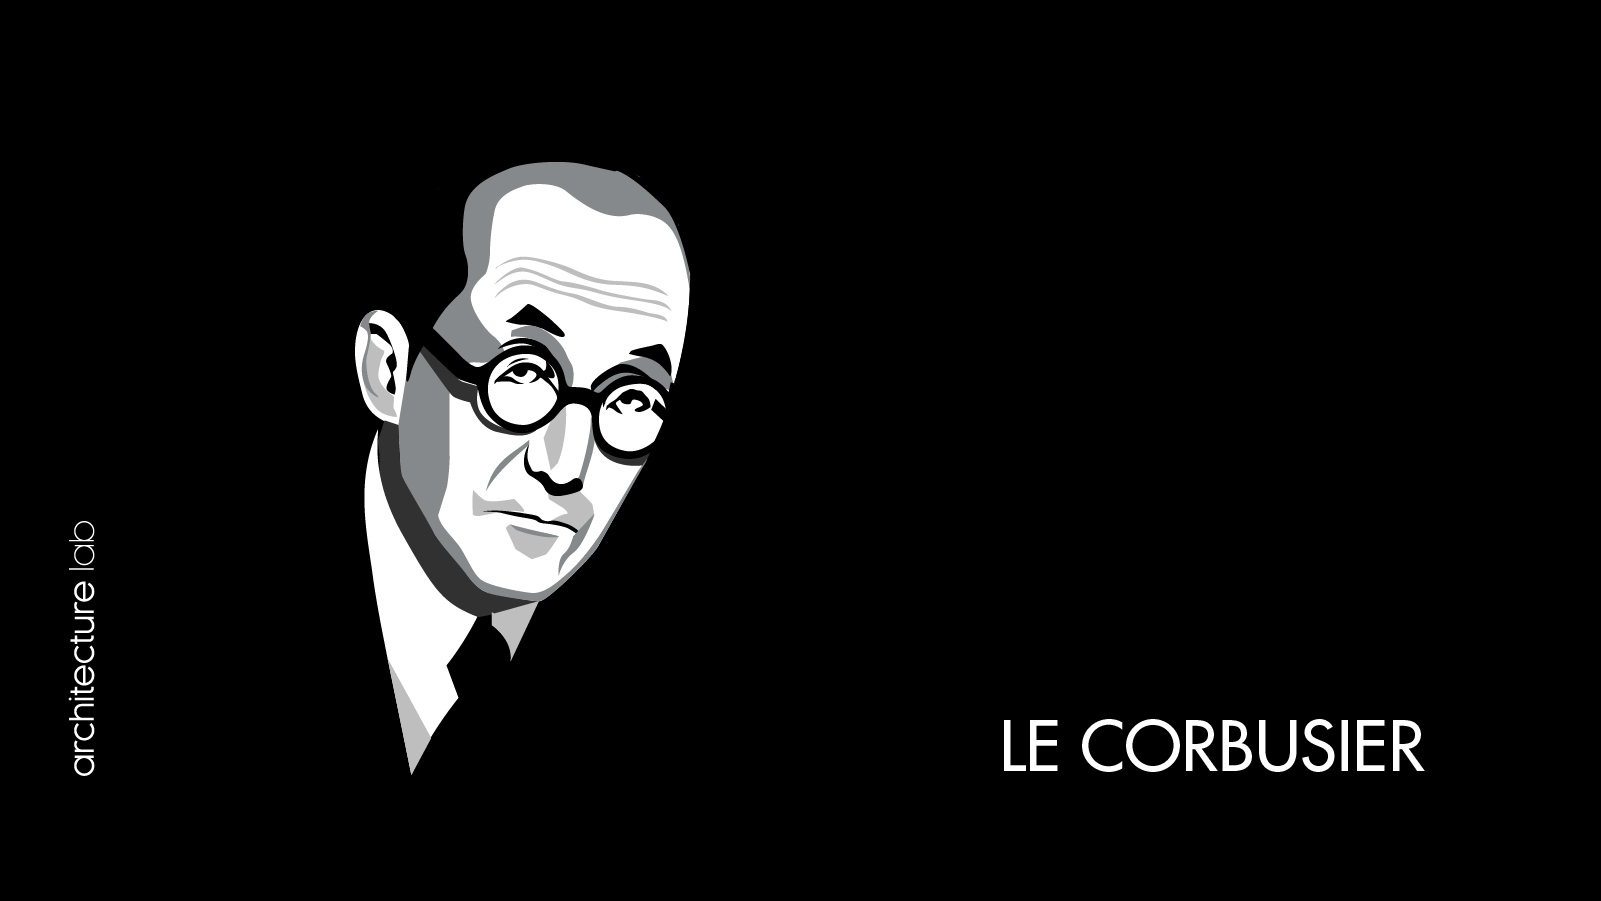 Le corbusier: biography, works, awards